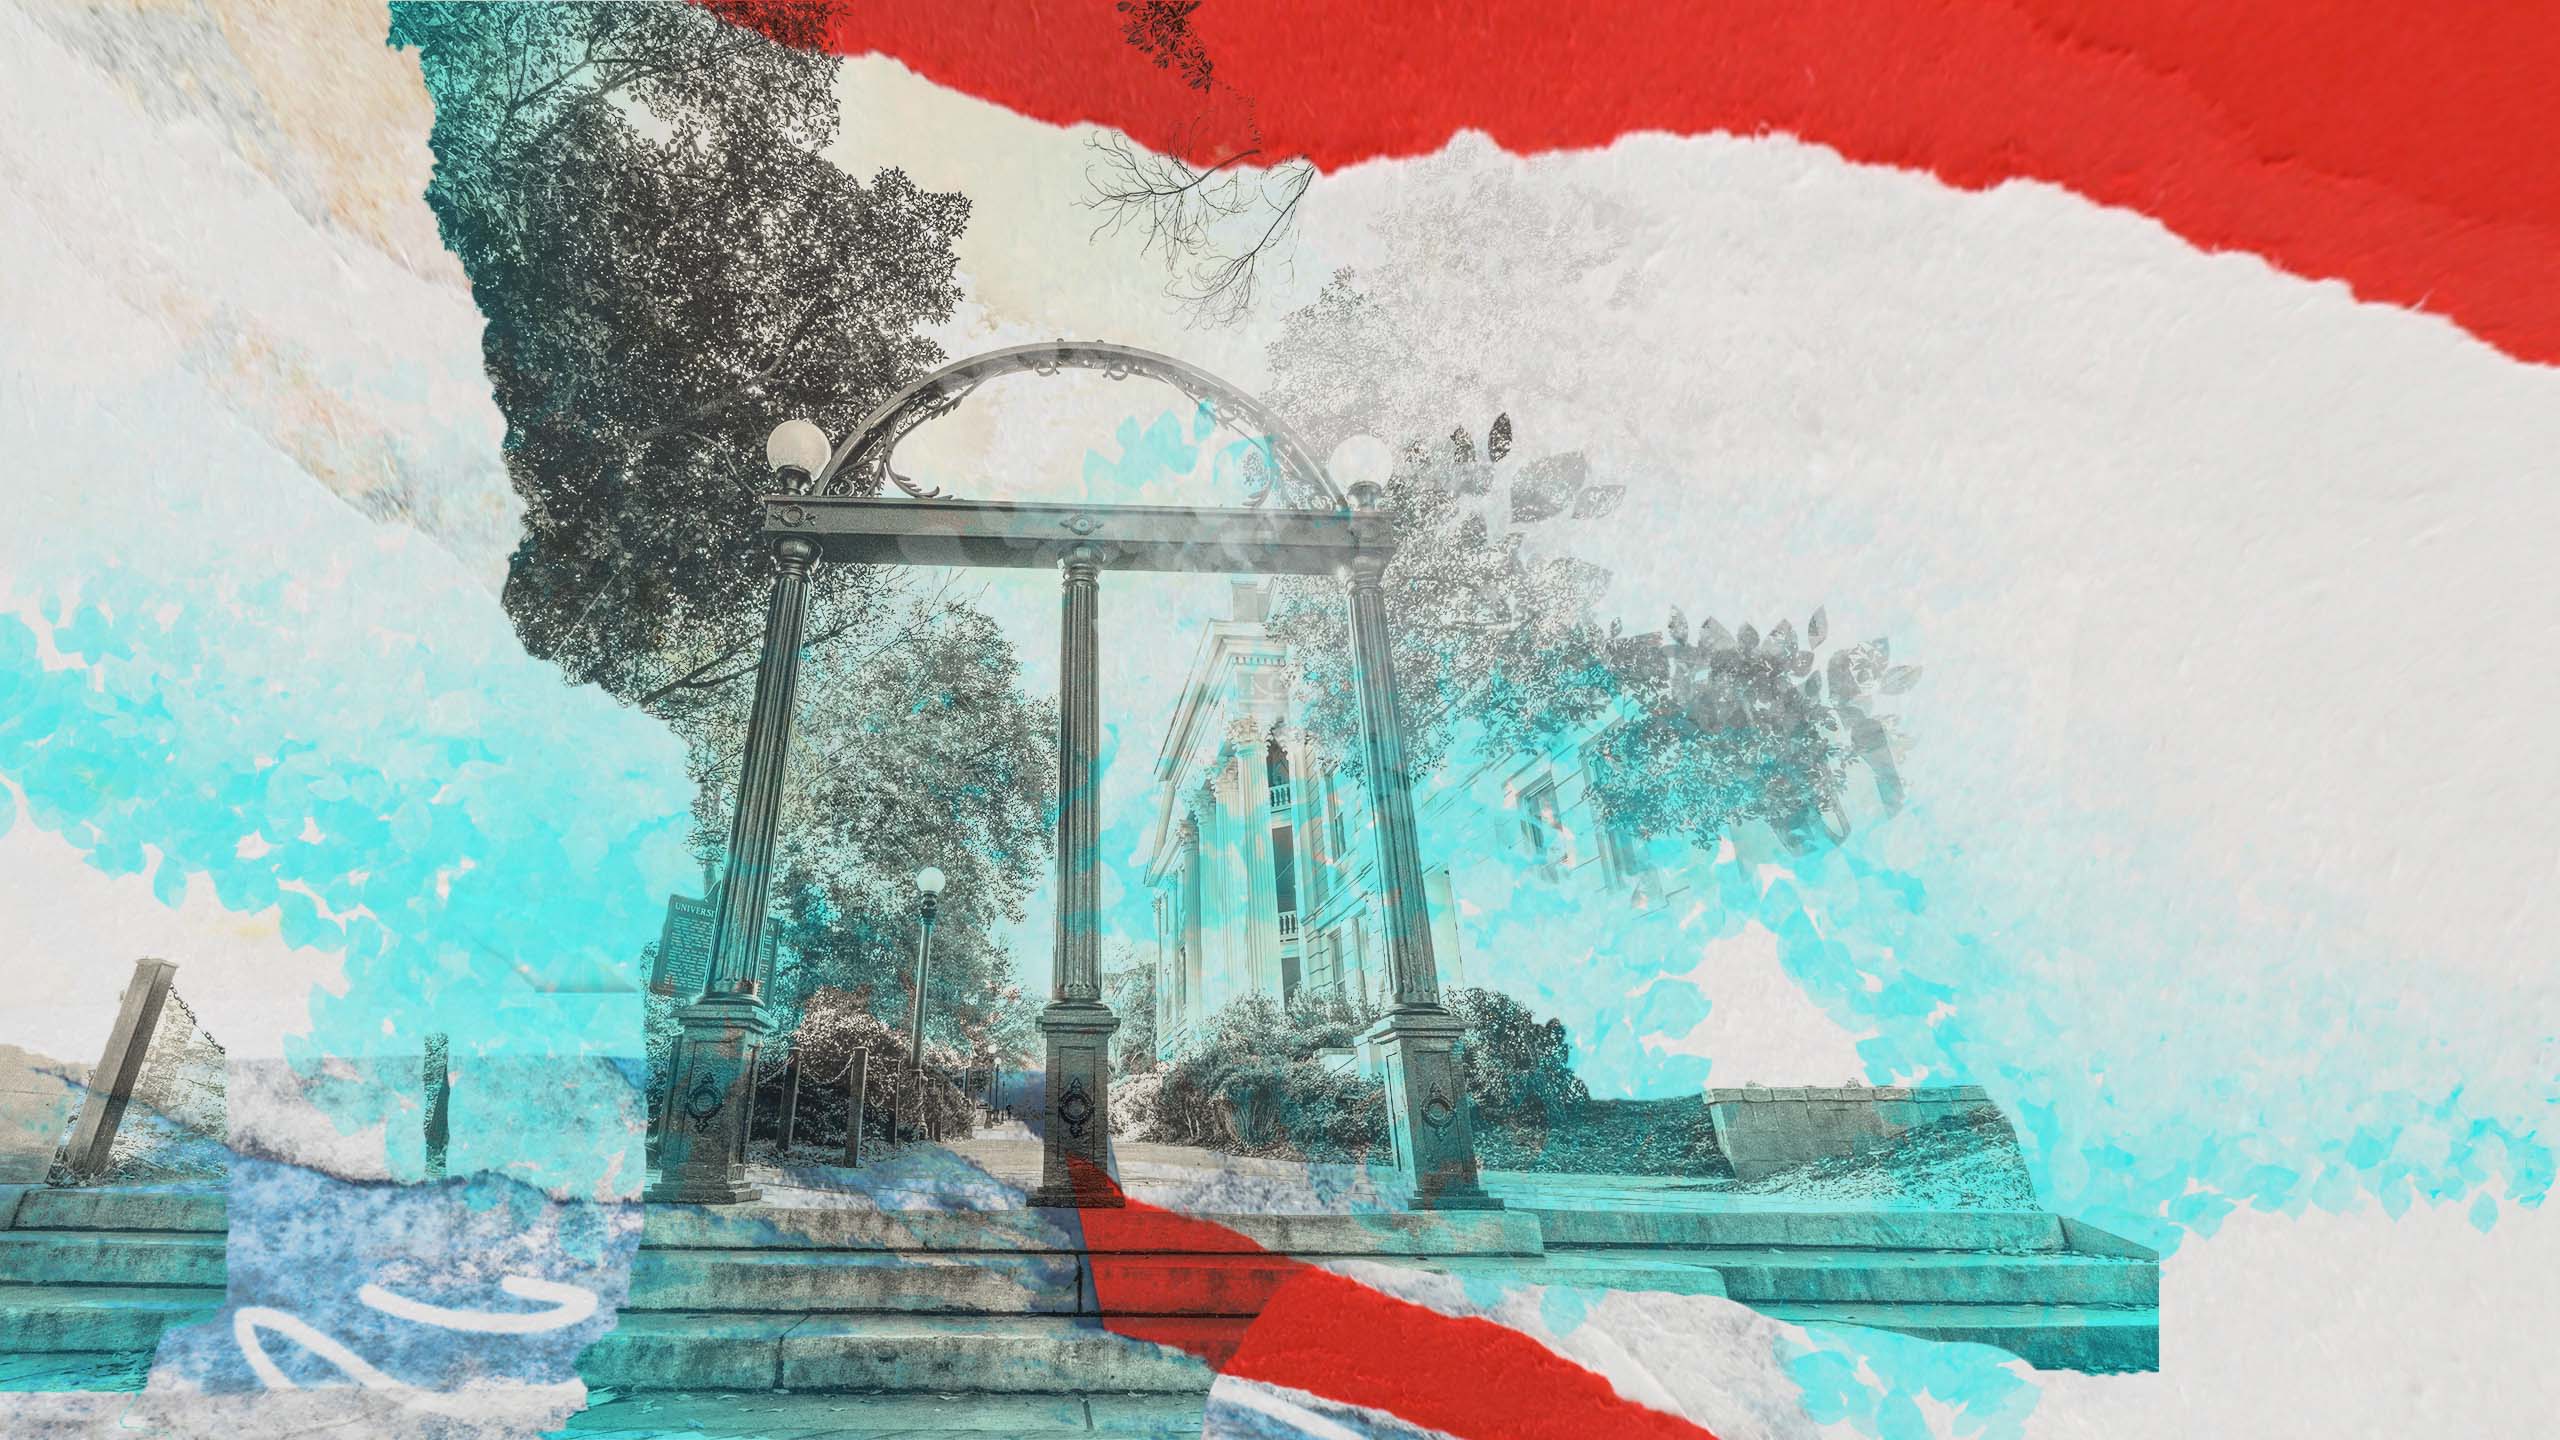 Digital collage of the Arch, heavily textured with plaster and torn paper effects .